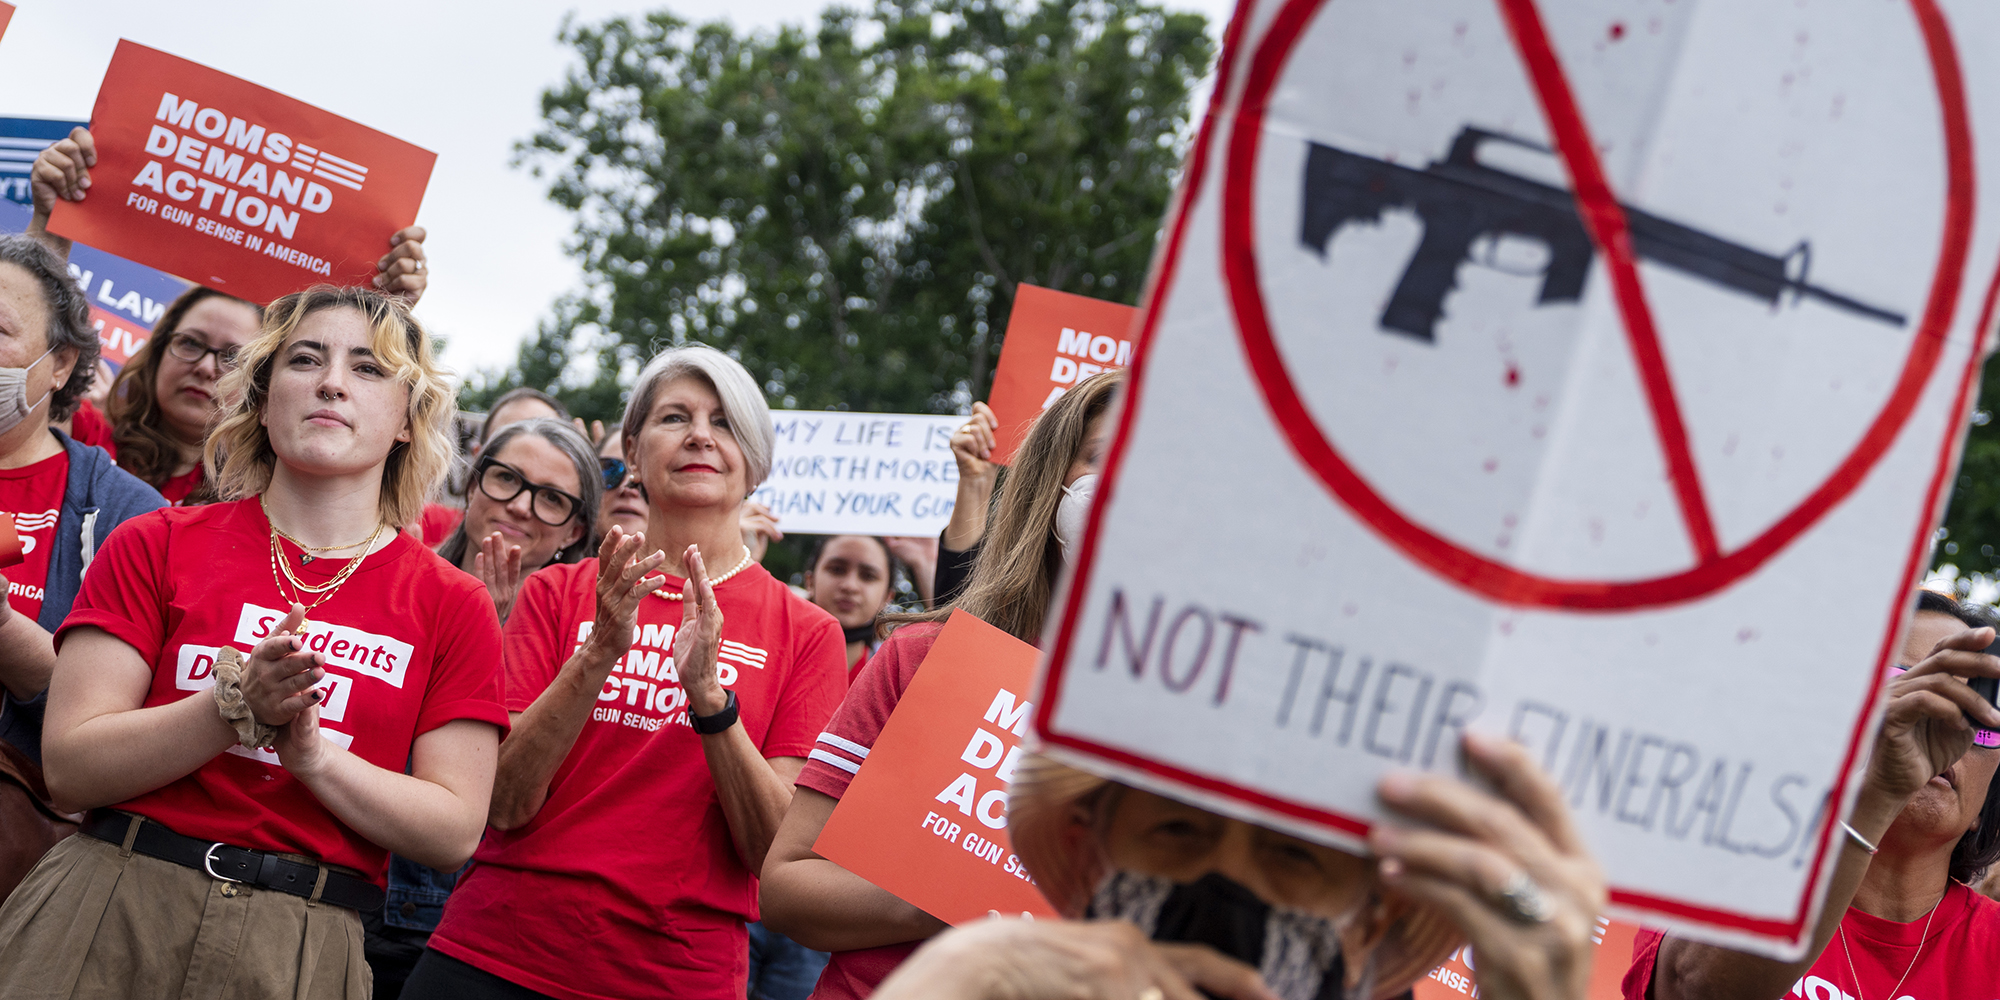 Anti-gun activists protest with signs and insignia against firearms outside the White House in Washington